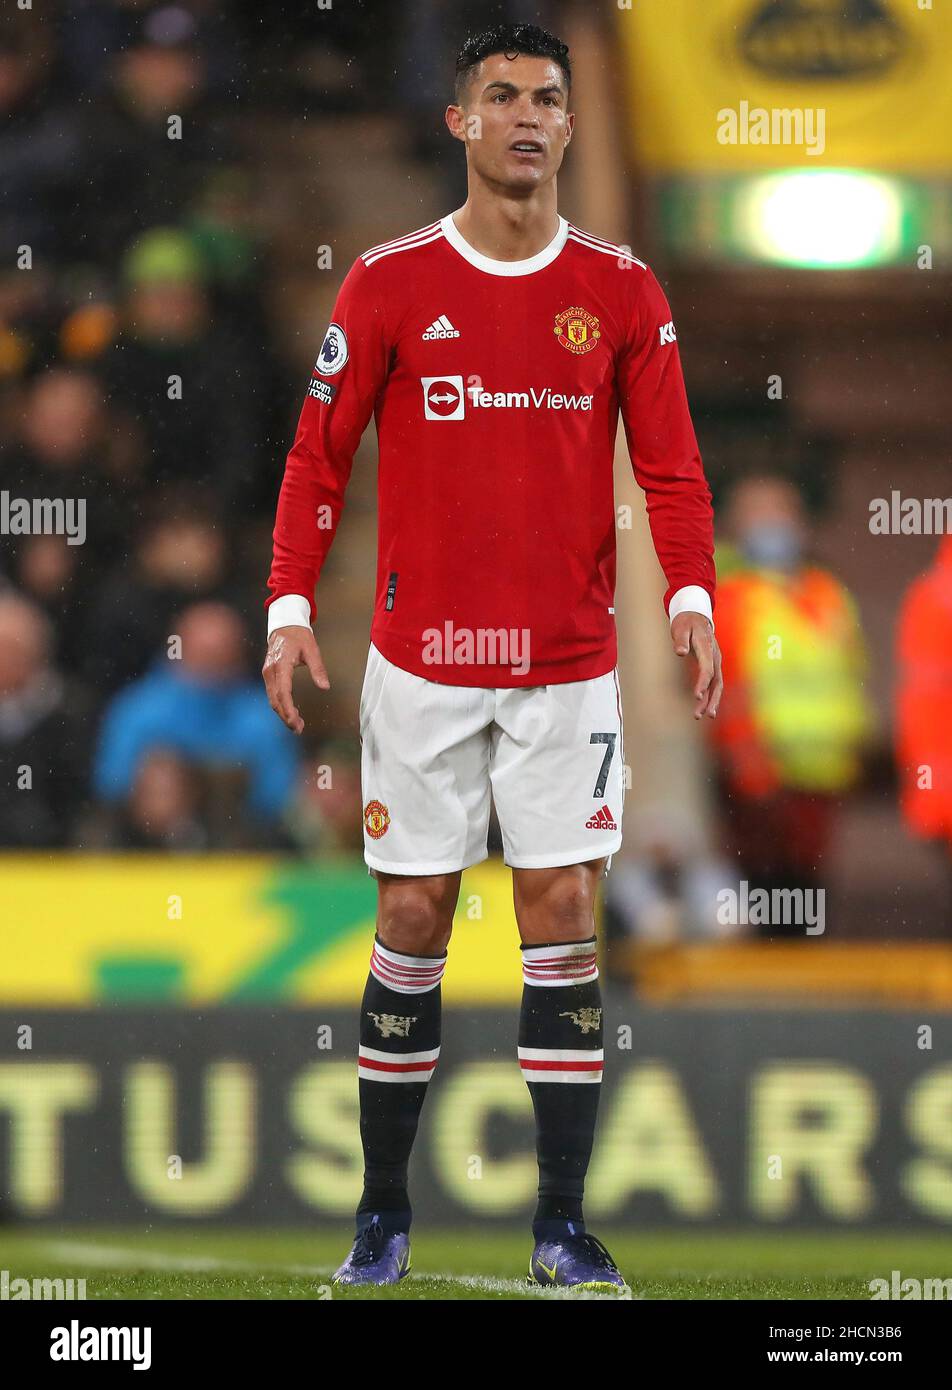 Cristiano Ronaldo of Manchester United - Norwich City v Manchester United, Premier League, Carrow Road, Norwich, UK - 11th December 2021  Editorial Use Only - DataCo restrictions apply Stock Photo